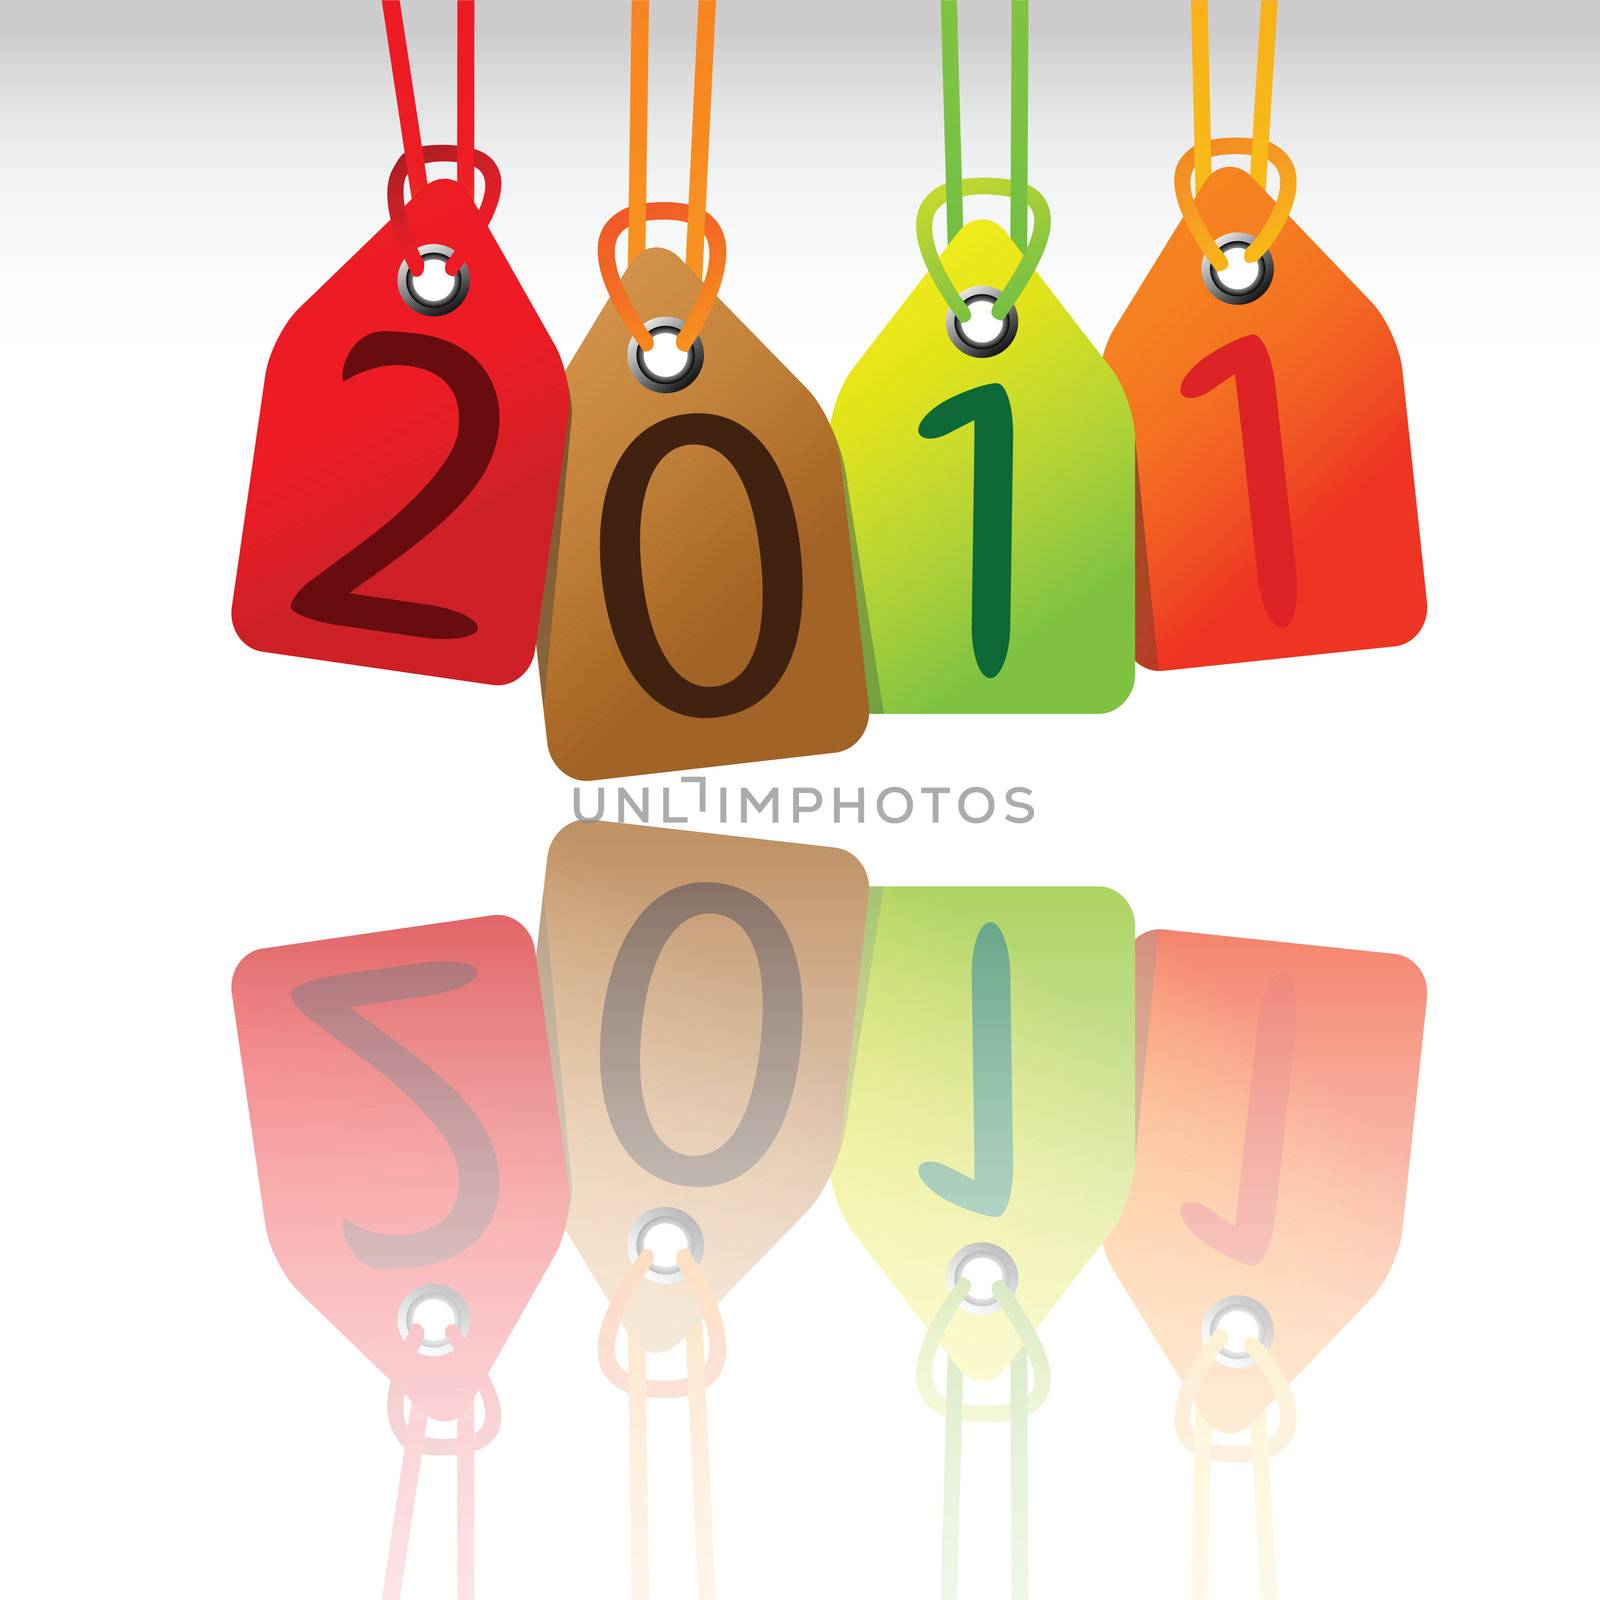 2011 tags reflected, abstract vector art illustration